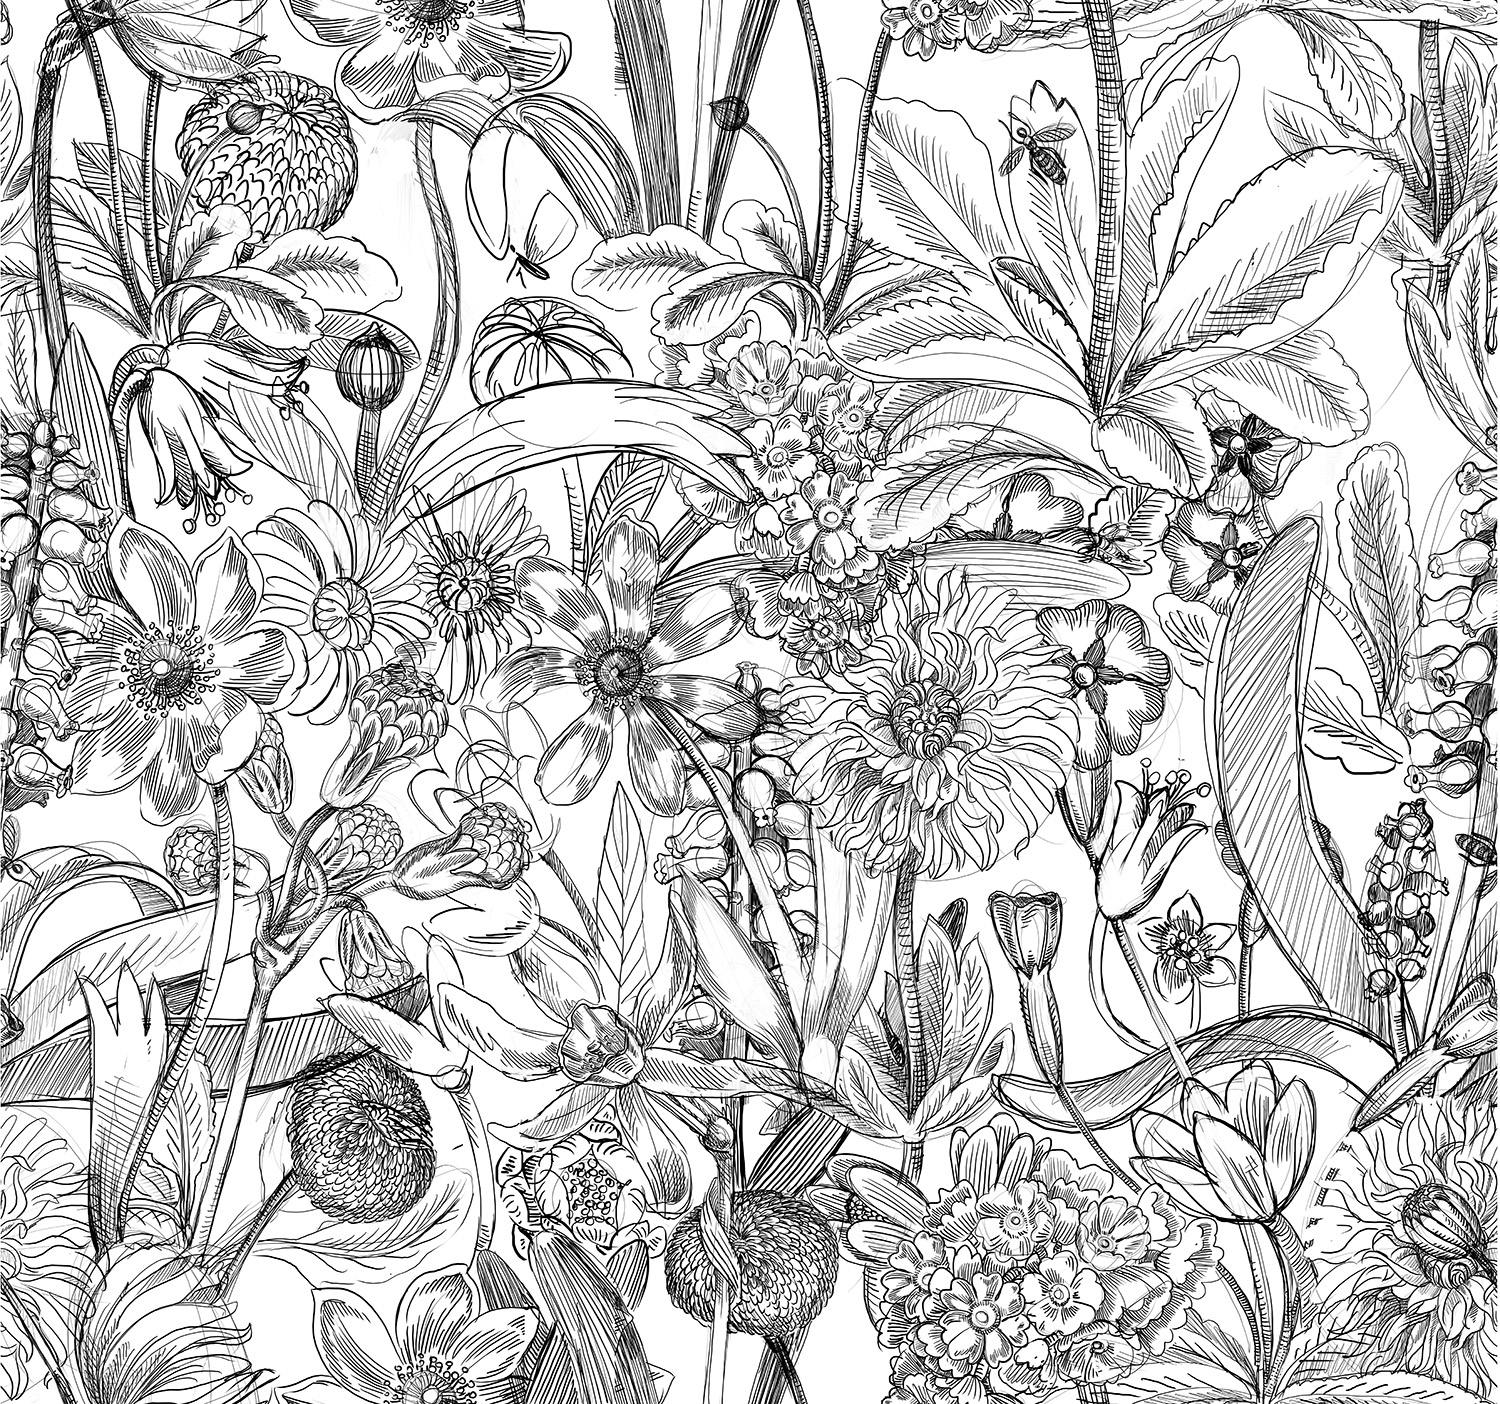 Repetitive sketch of fauna and flora for a wall